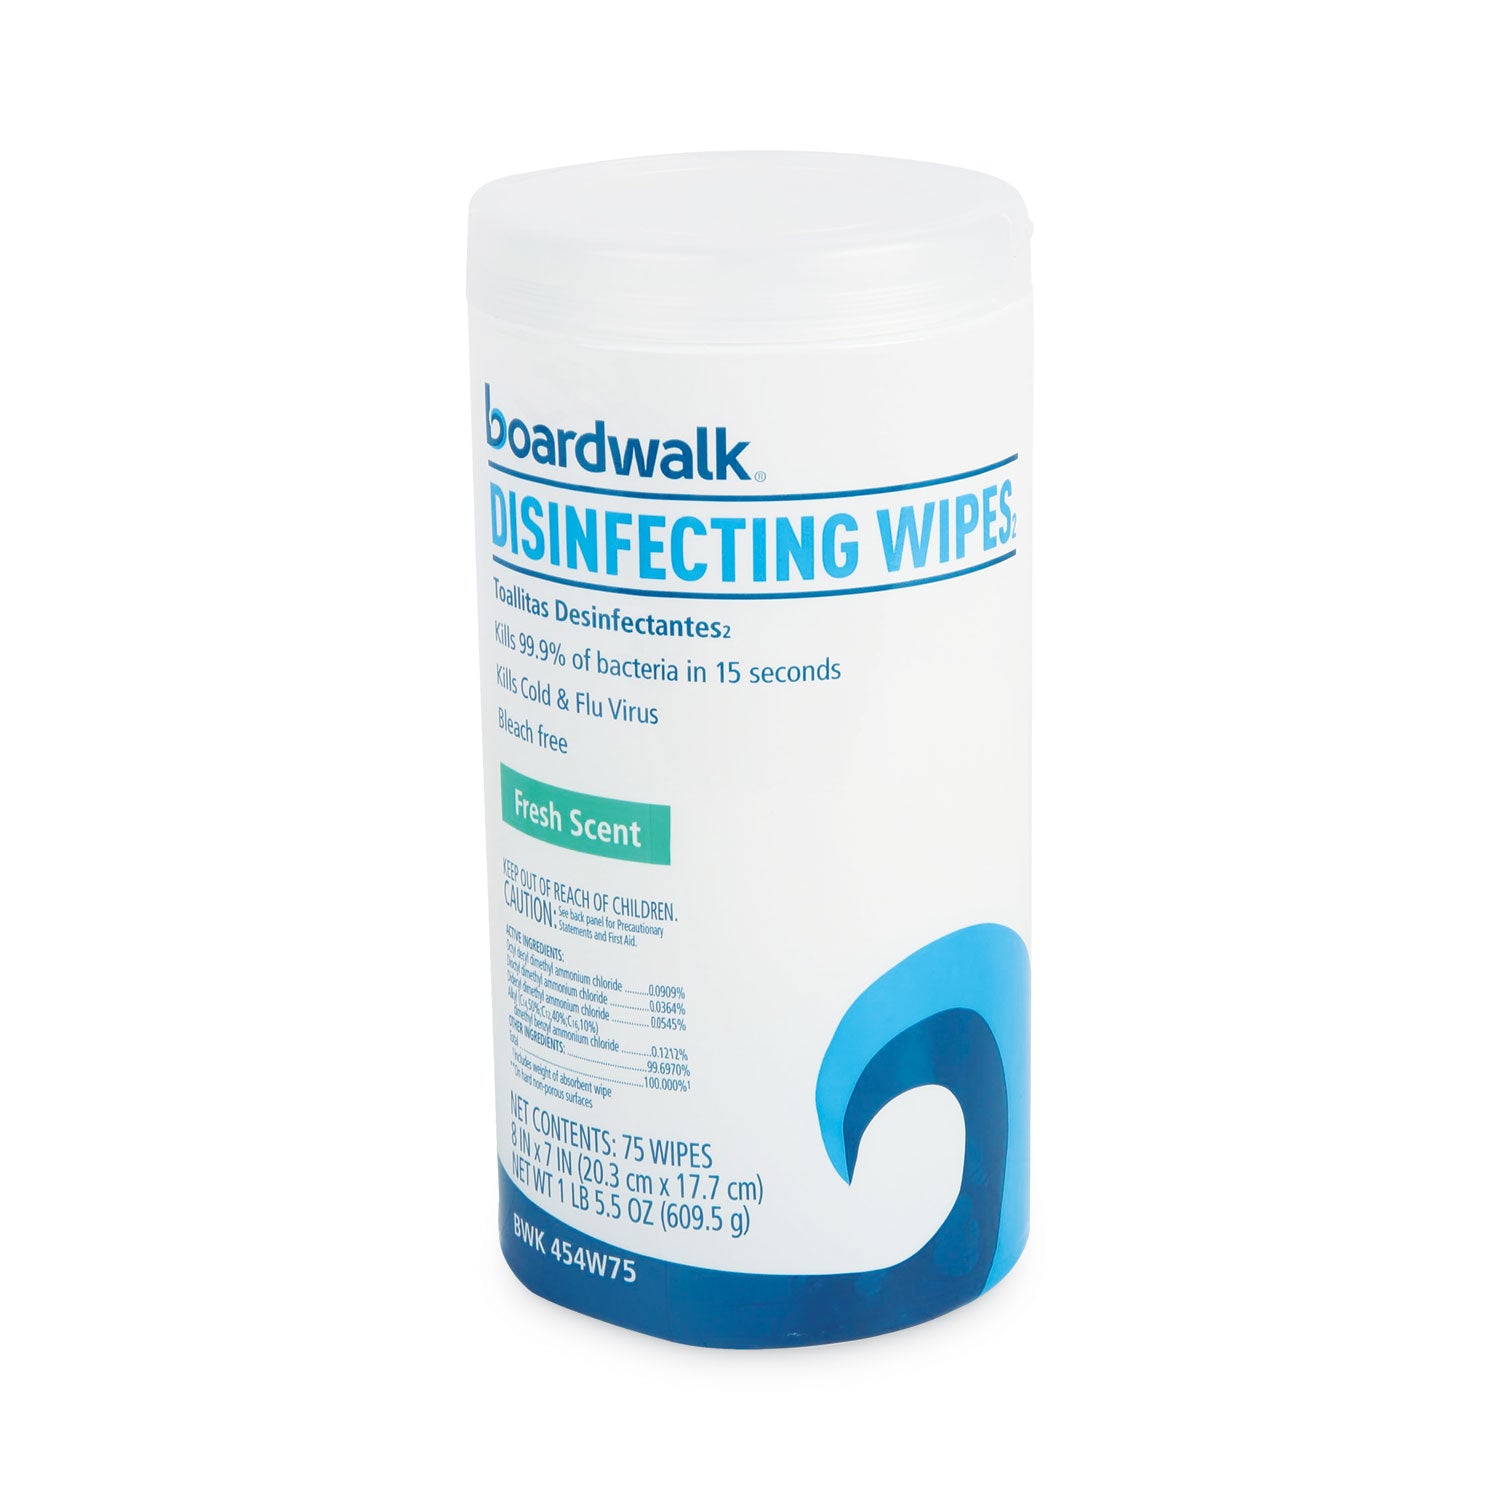 disinfecting-wipes-7-x-8-fresh-scent-75-canister-3-canisters-pack_bwk454w753pk - 2